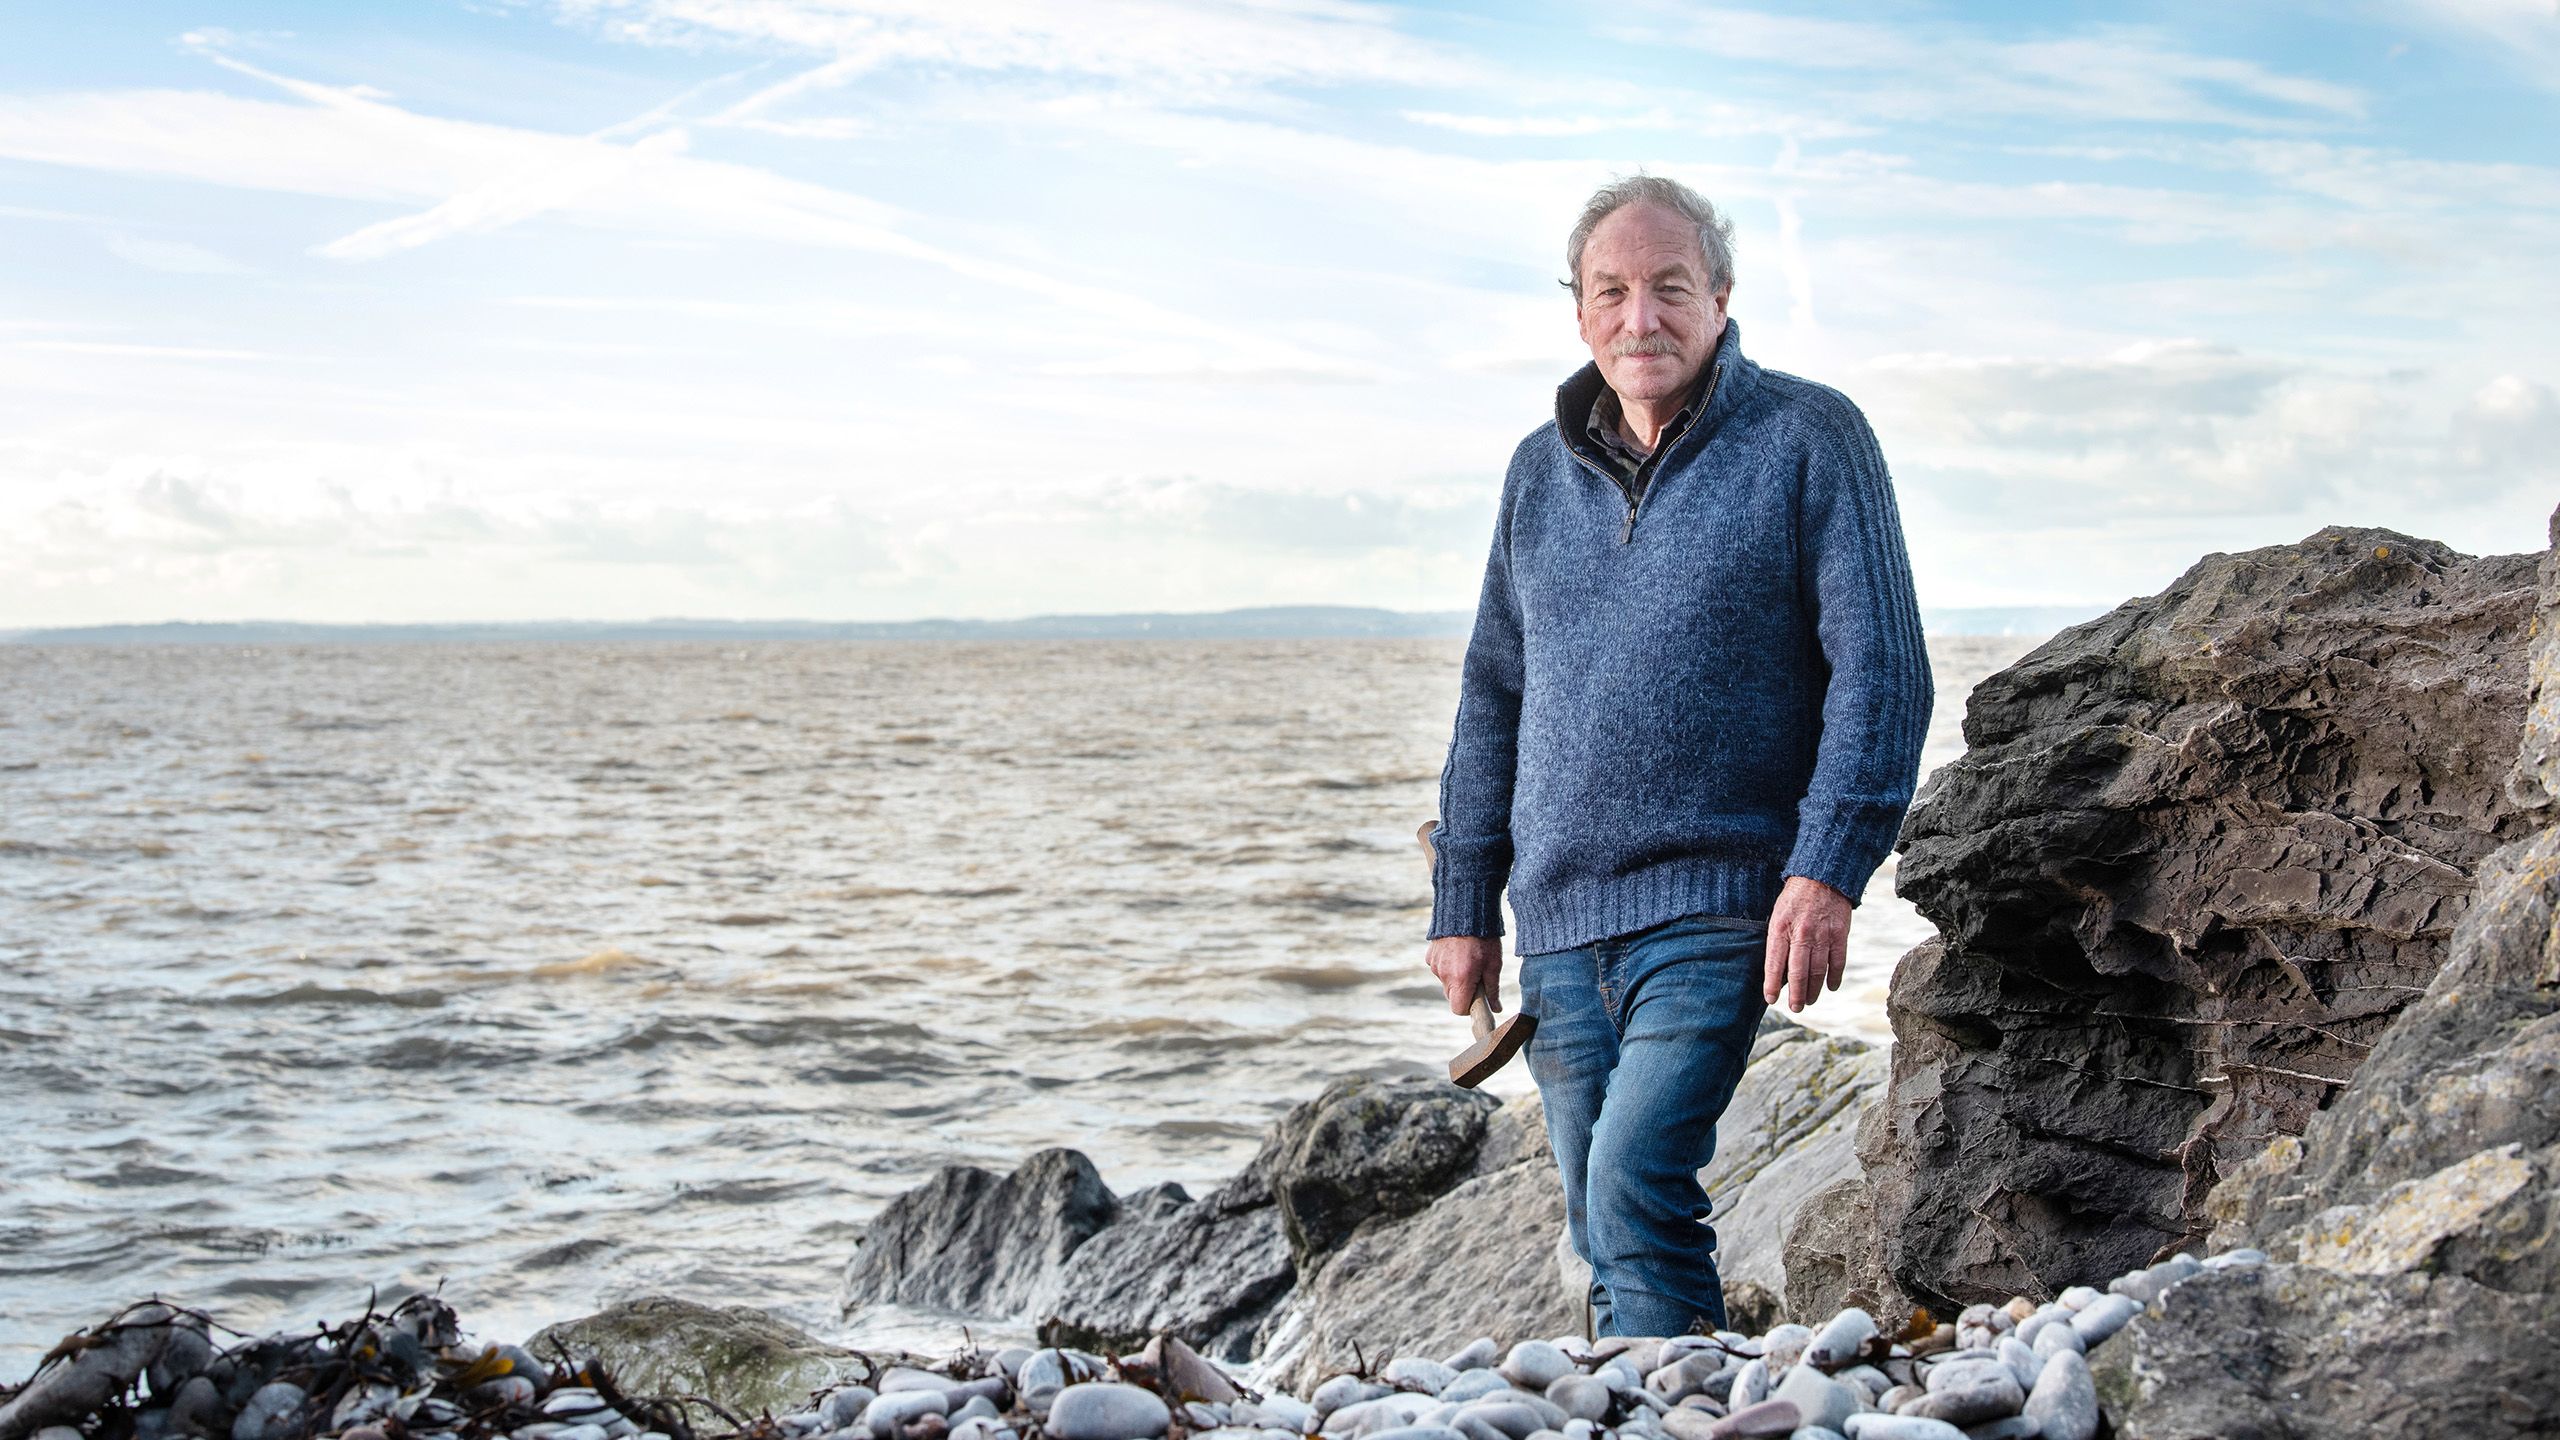 Professor Sir Stephen Sparks stands on a rocky beach looking out over the sea